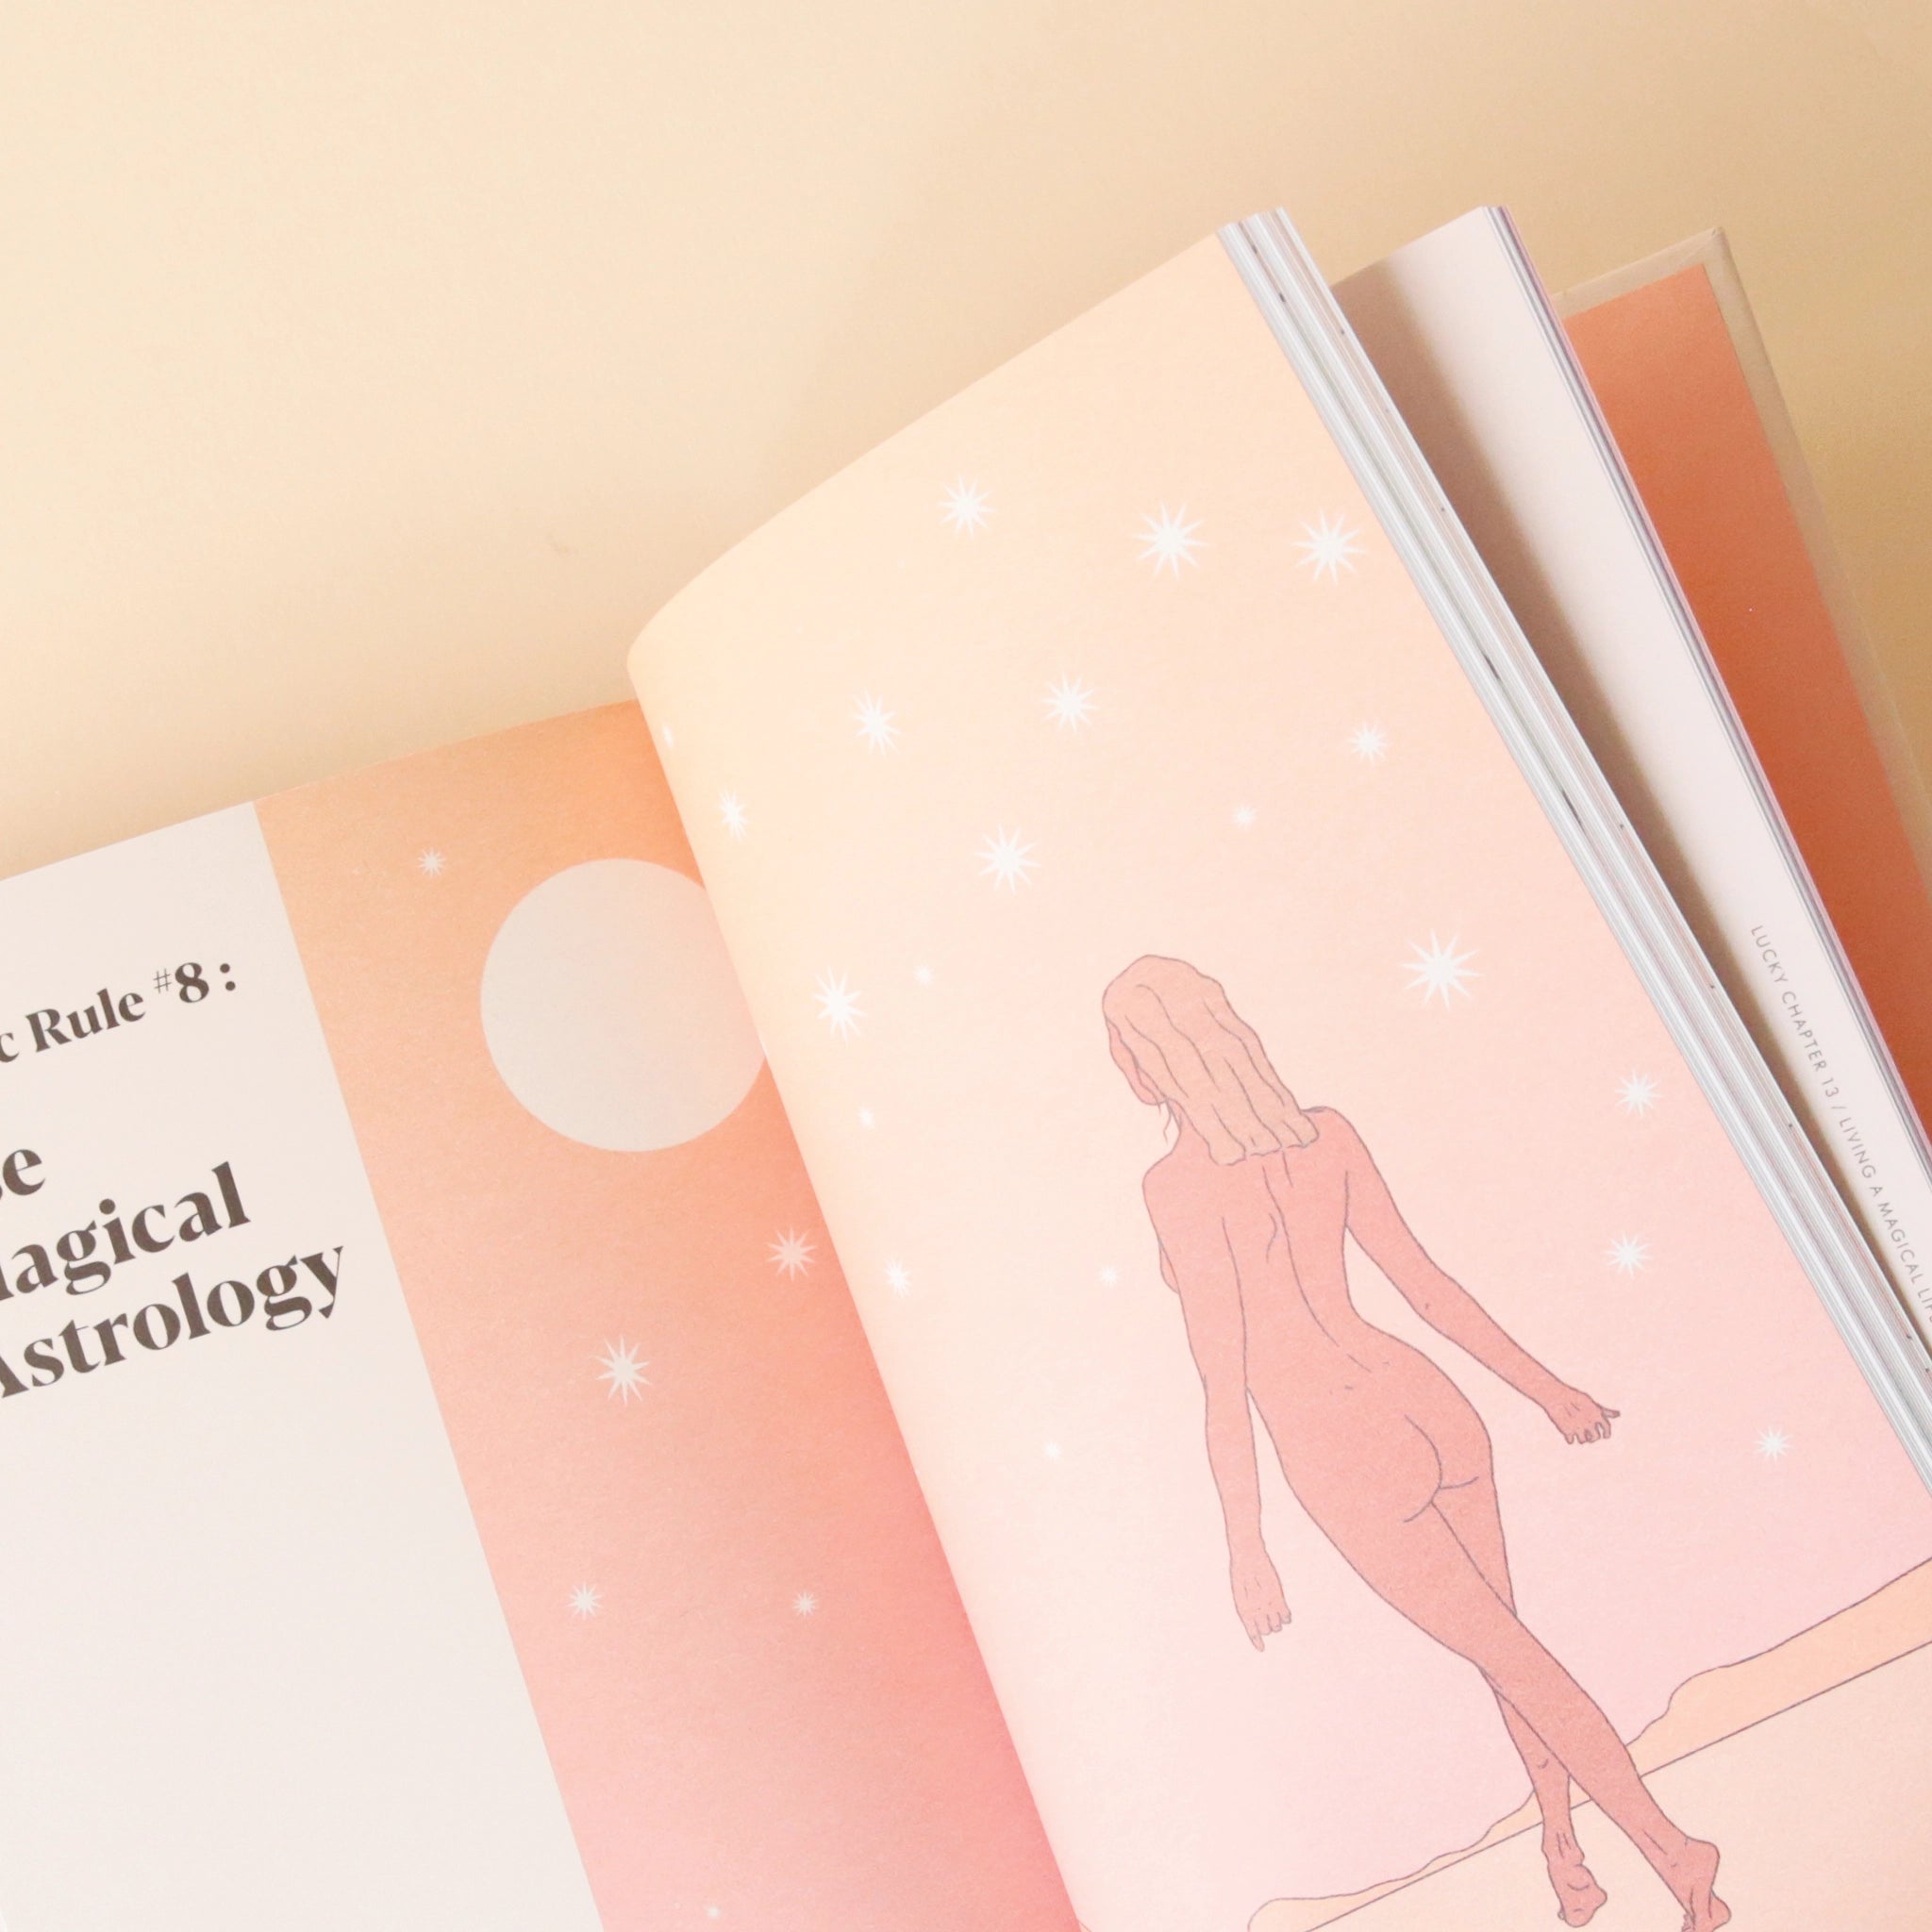 A peek inside the book, this page has an illustration of a nude woman walking away created with shades of orange a pinks. 